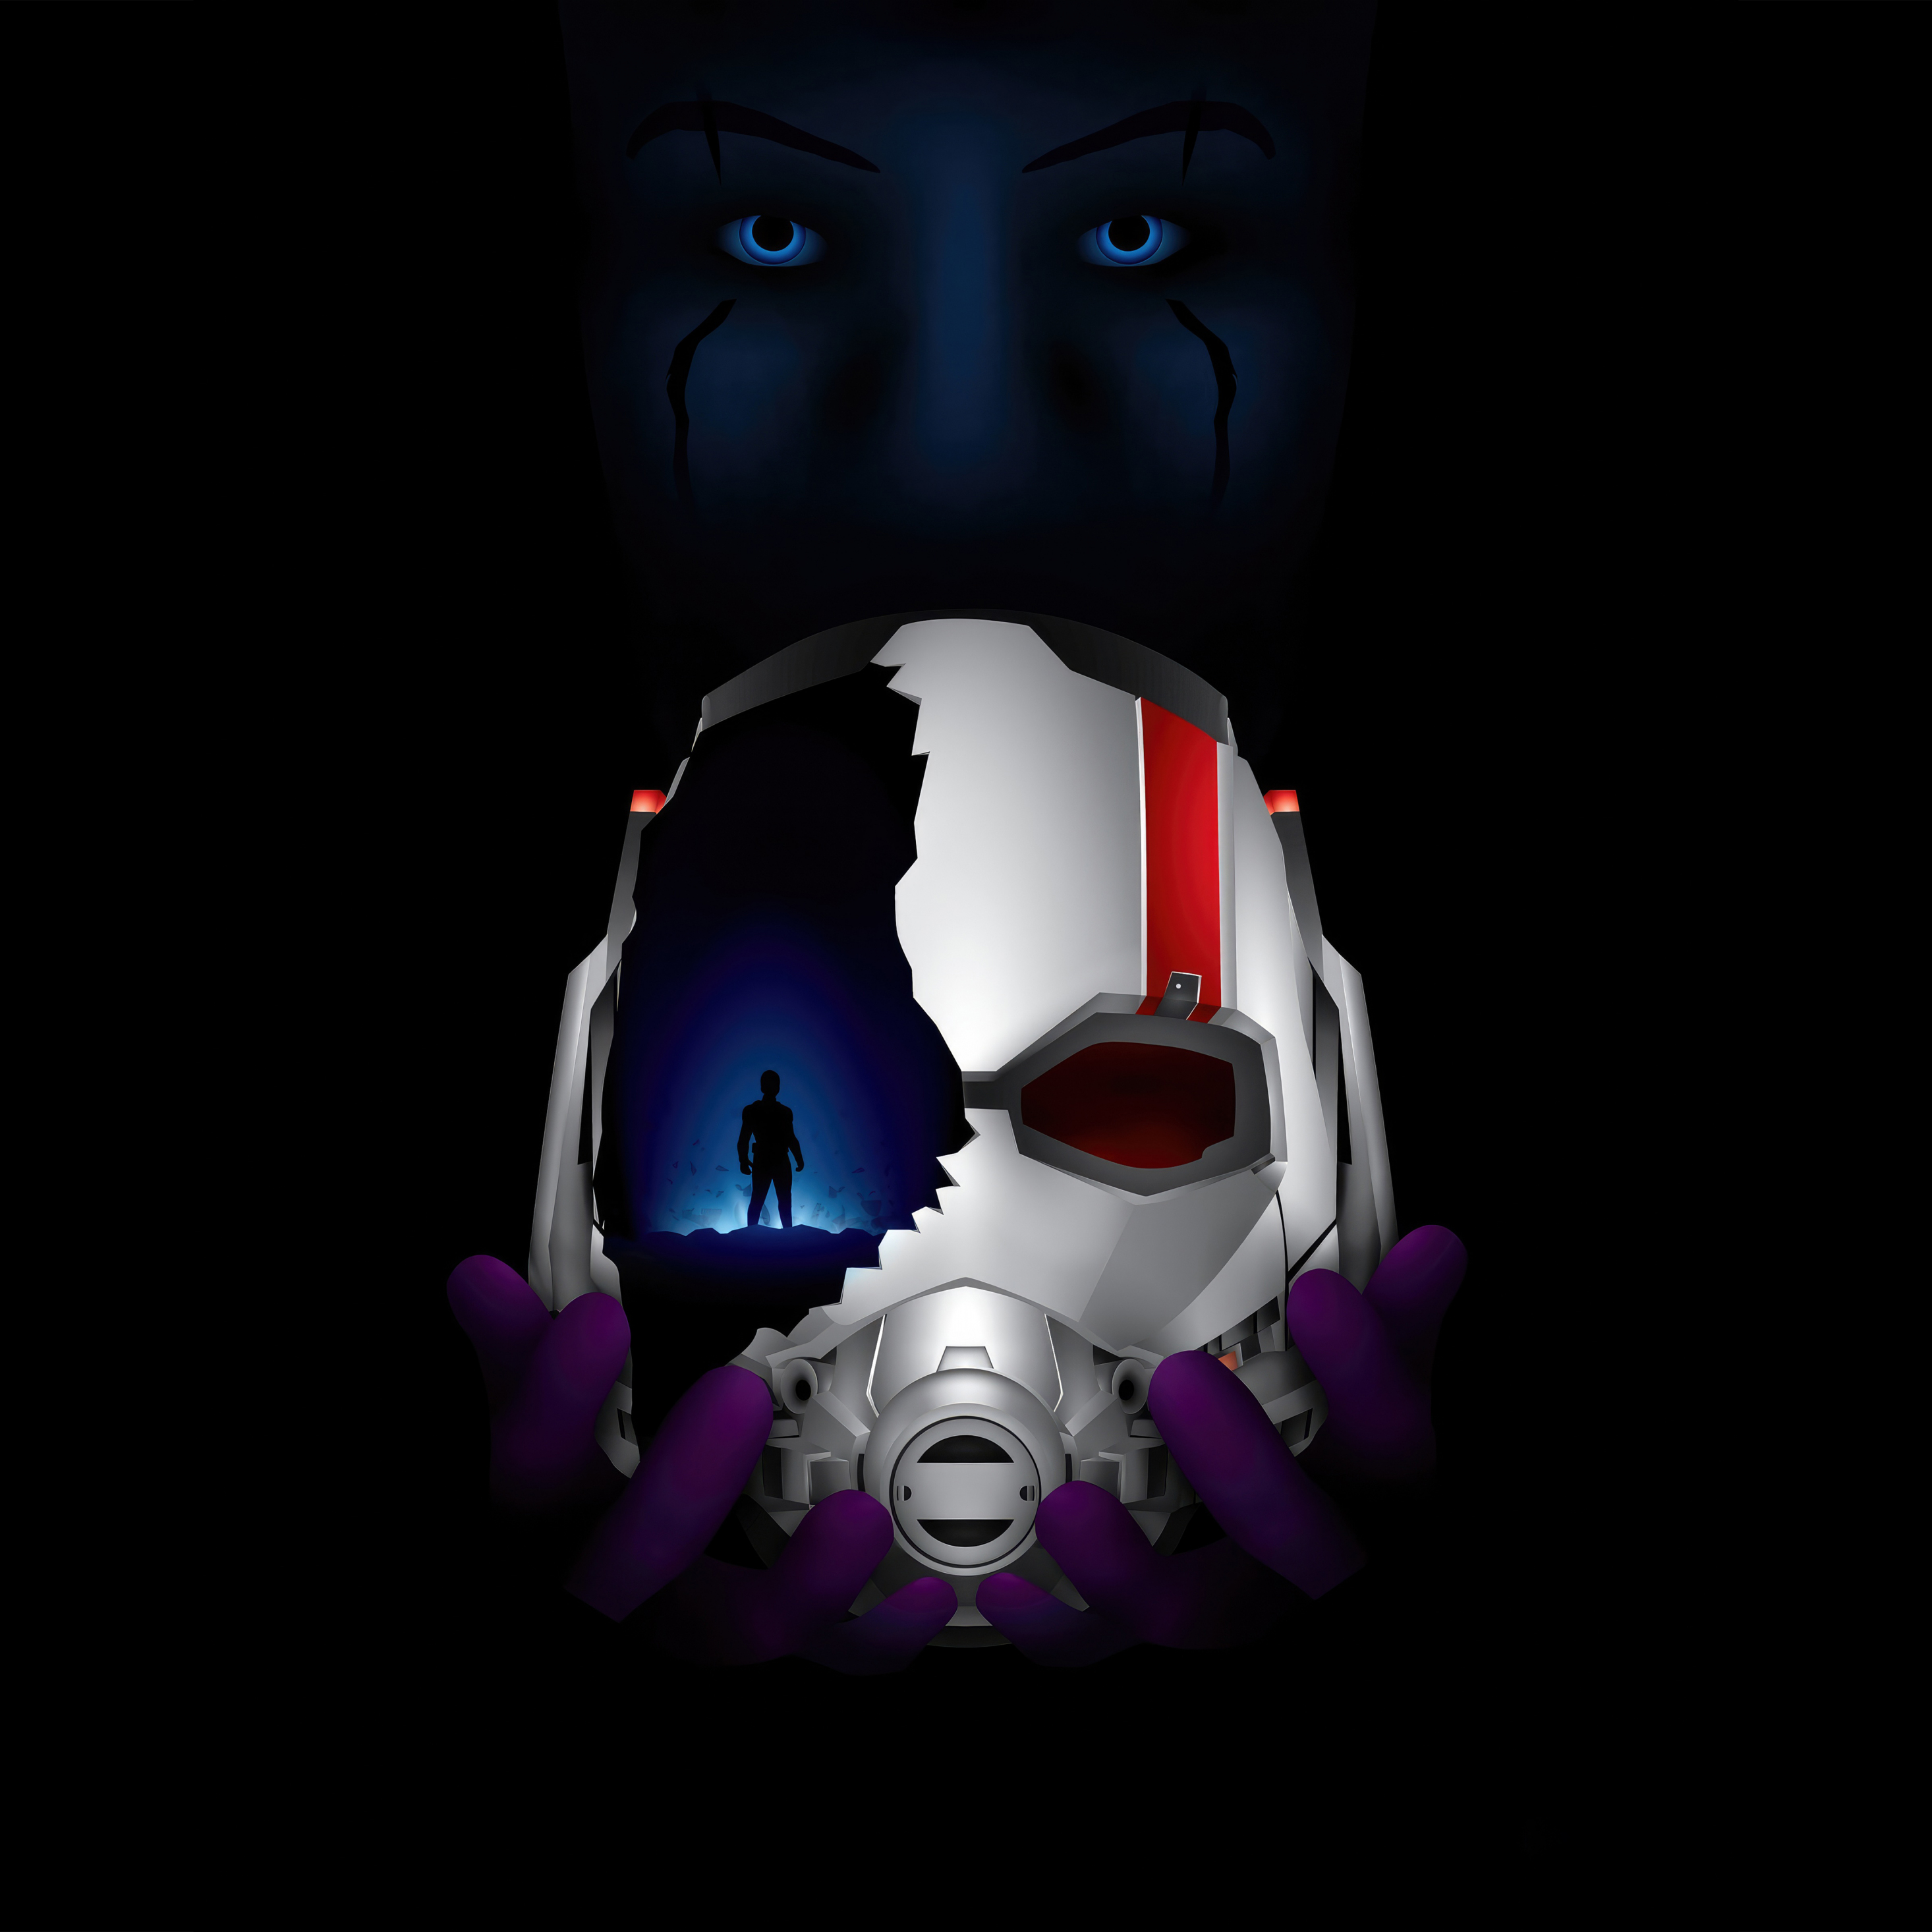 Antman Helmet and Kang the Conqueror, movie, dark poster, 2932x2932 wallpaper